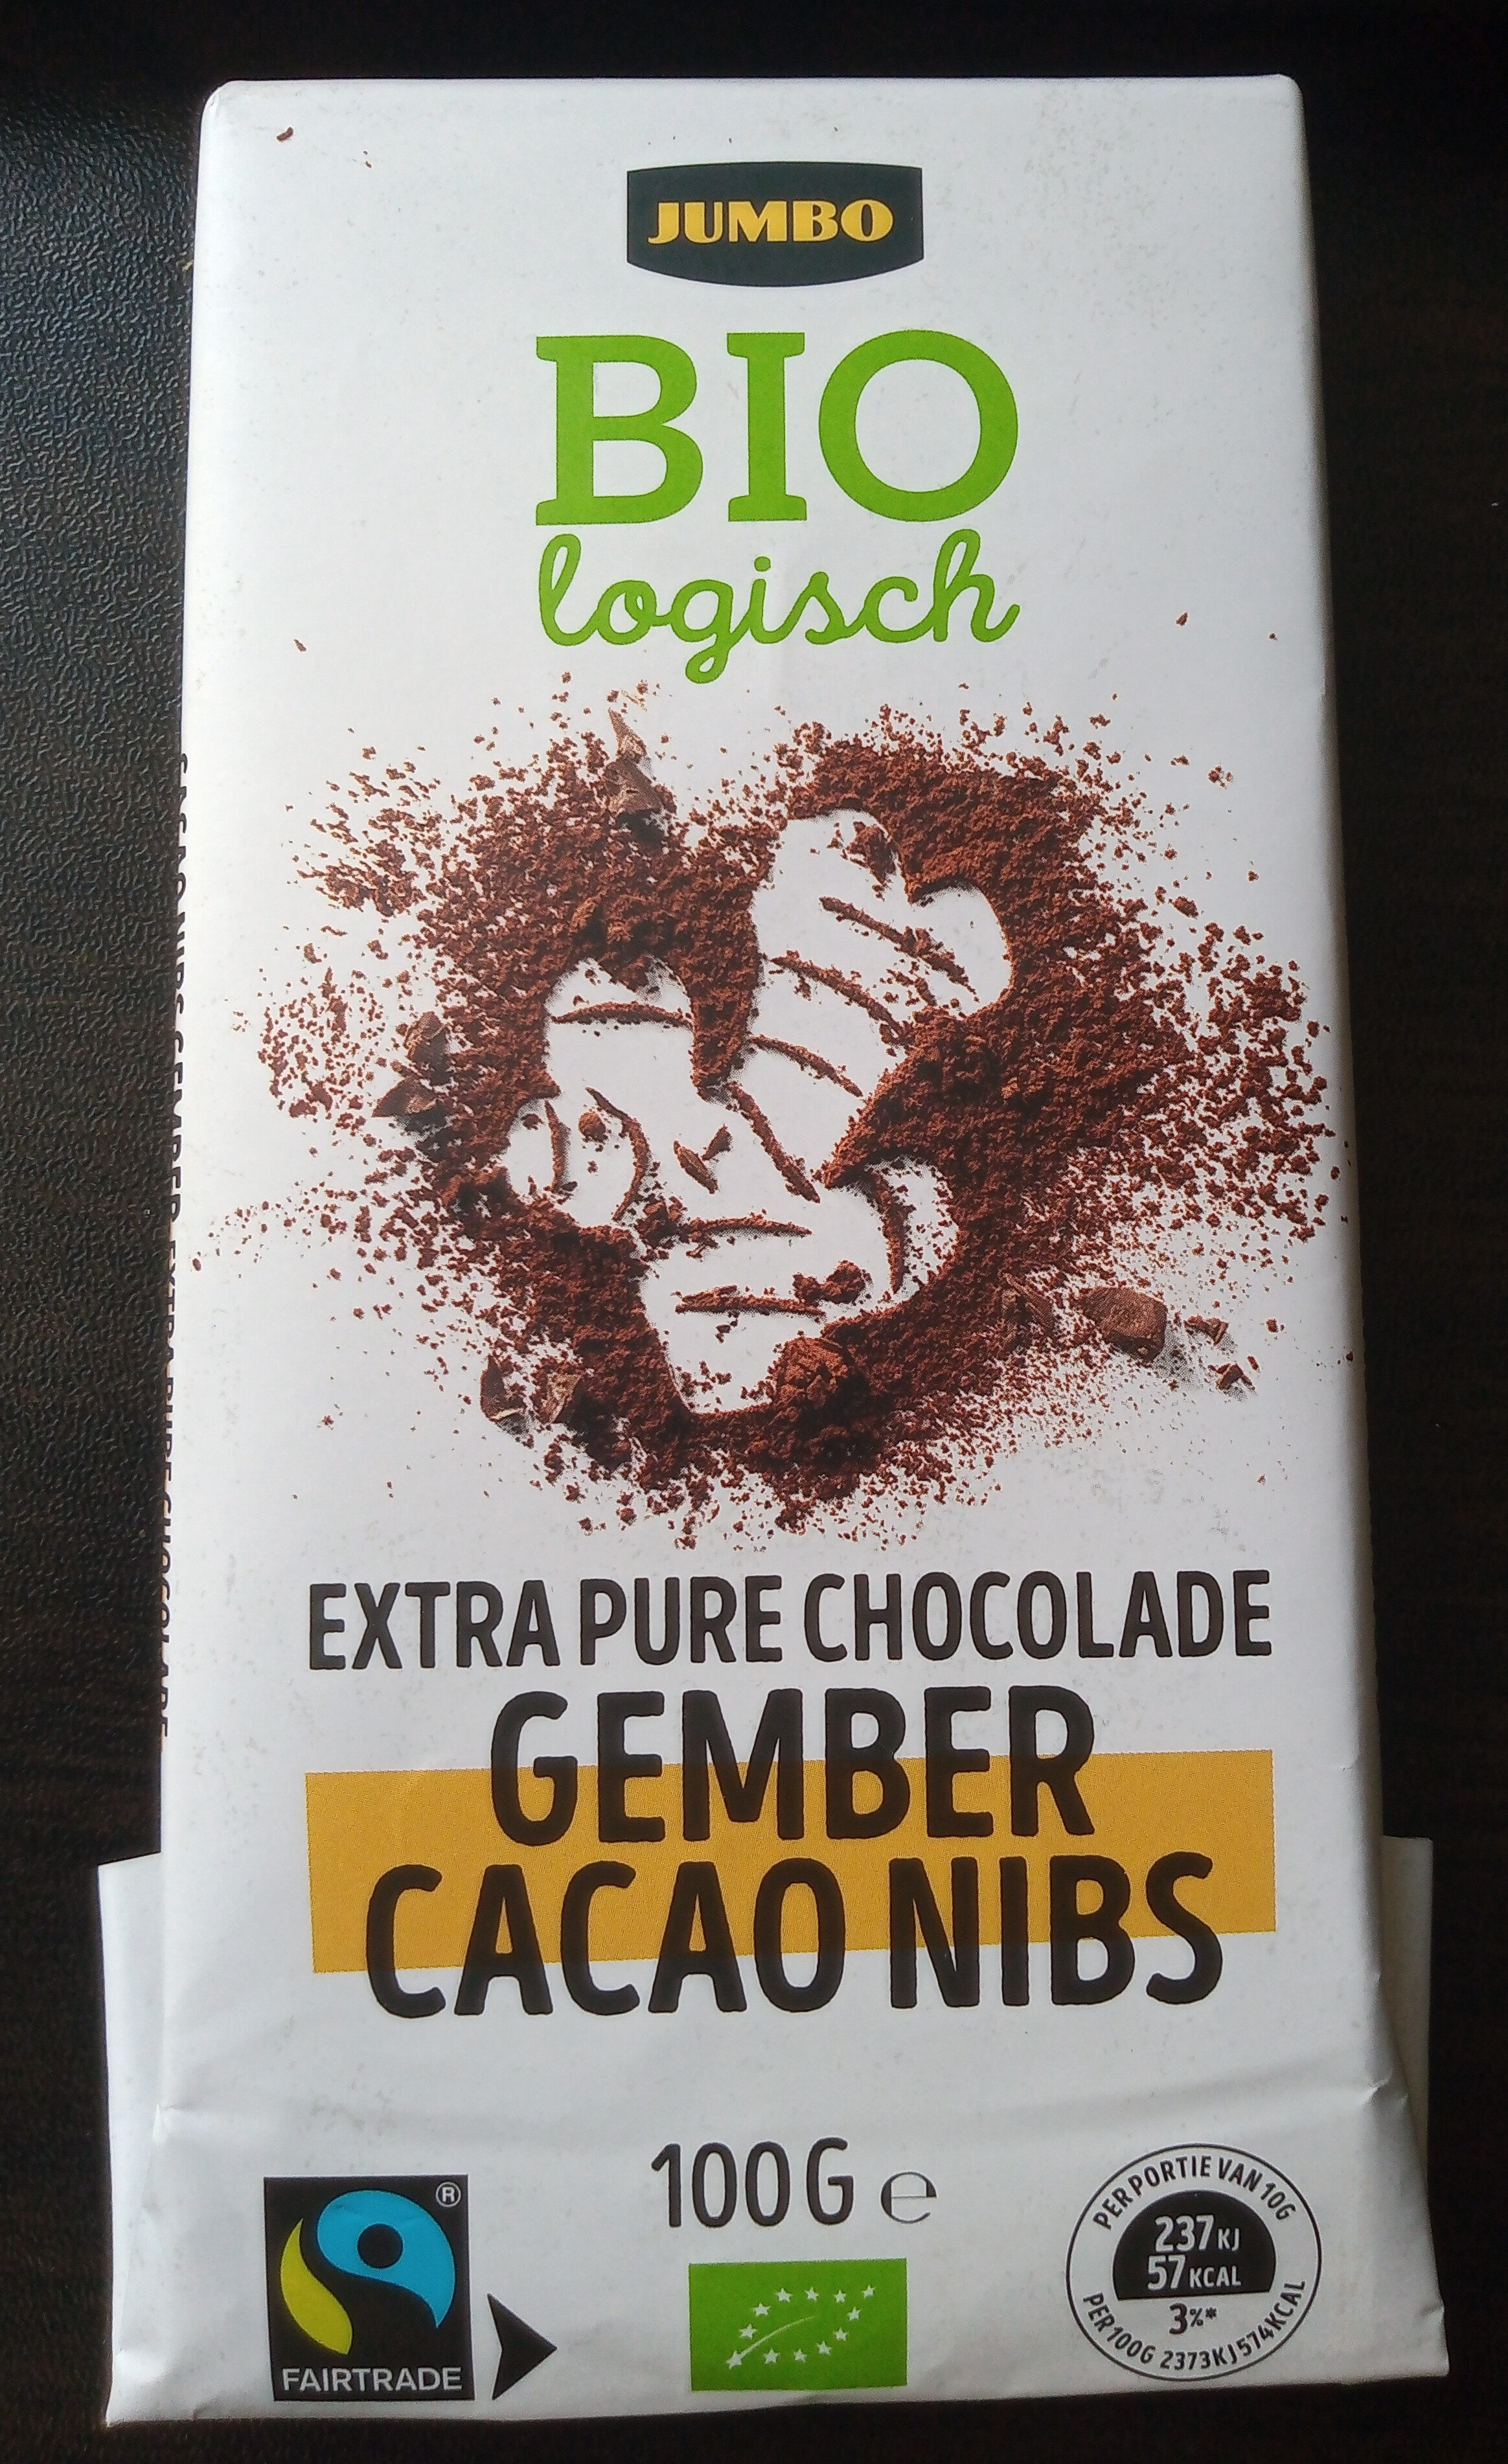 Gember cacao nibs - Product